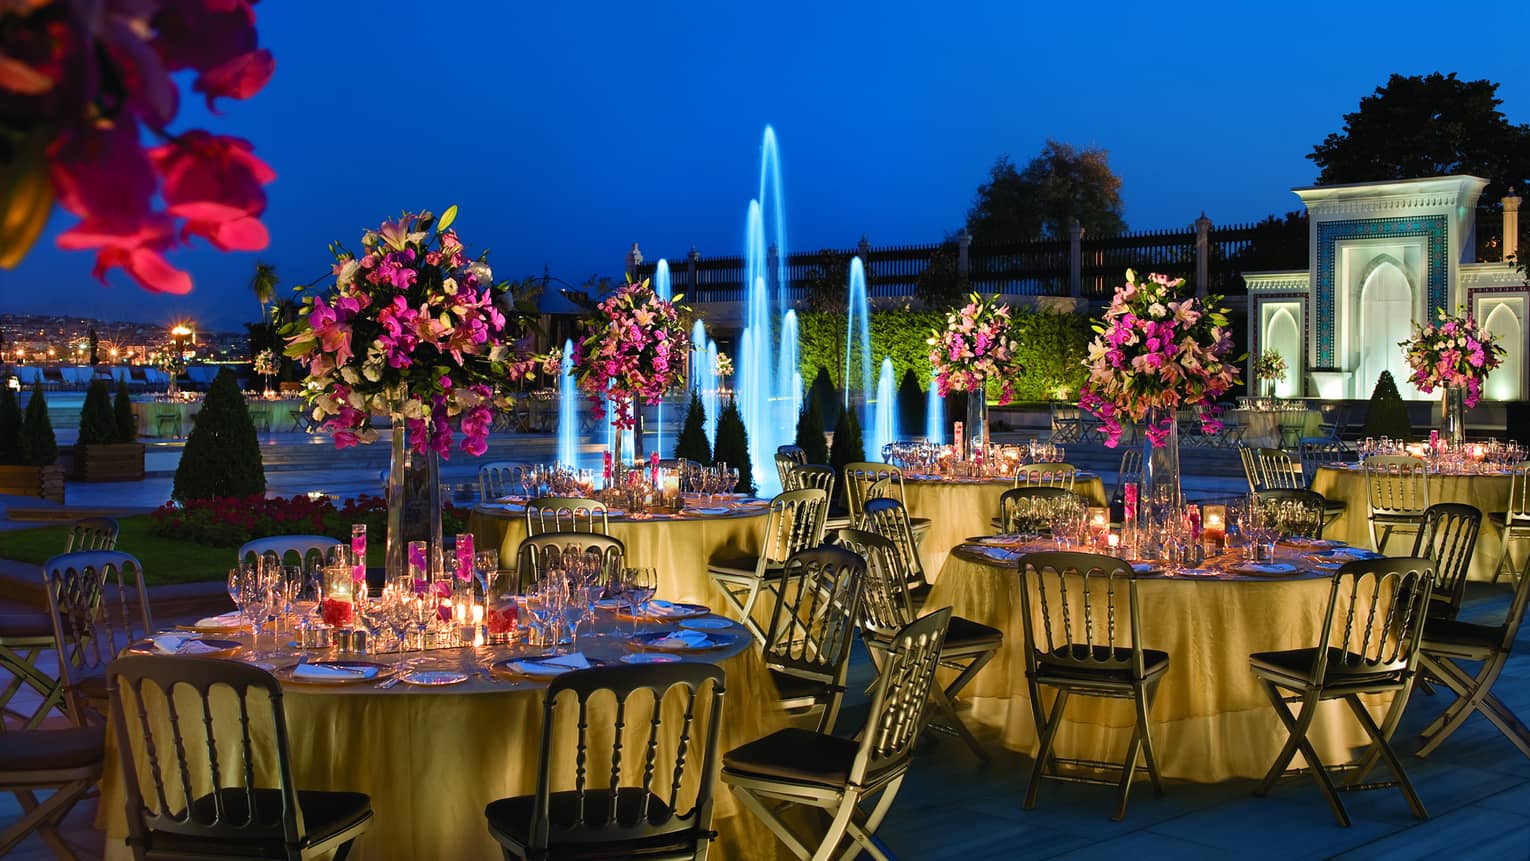 Wedding reception banquet tables with flowers at night in front of fountain with blue lights 